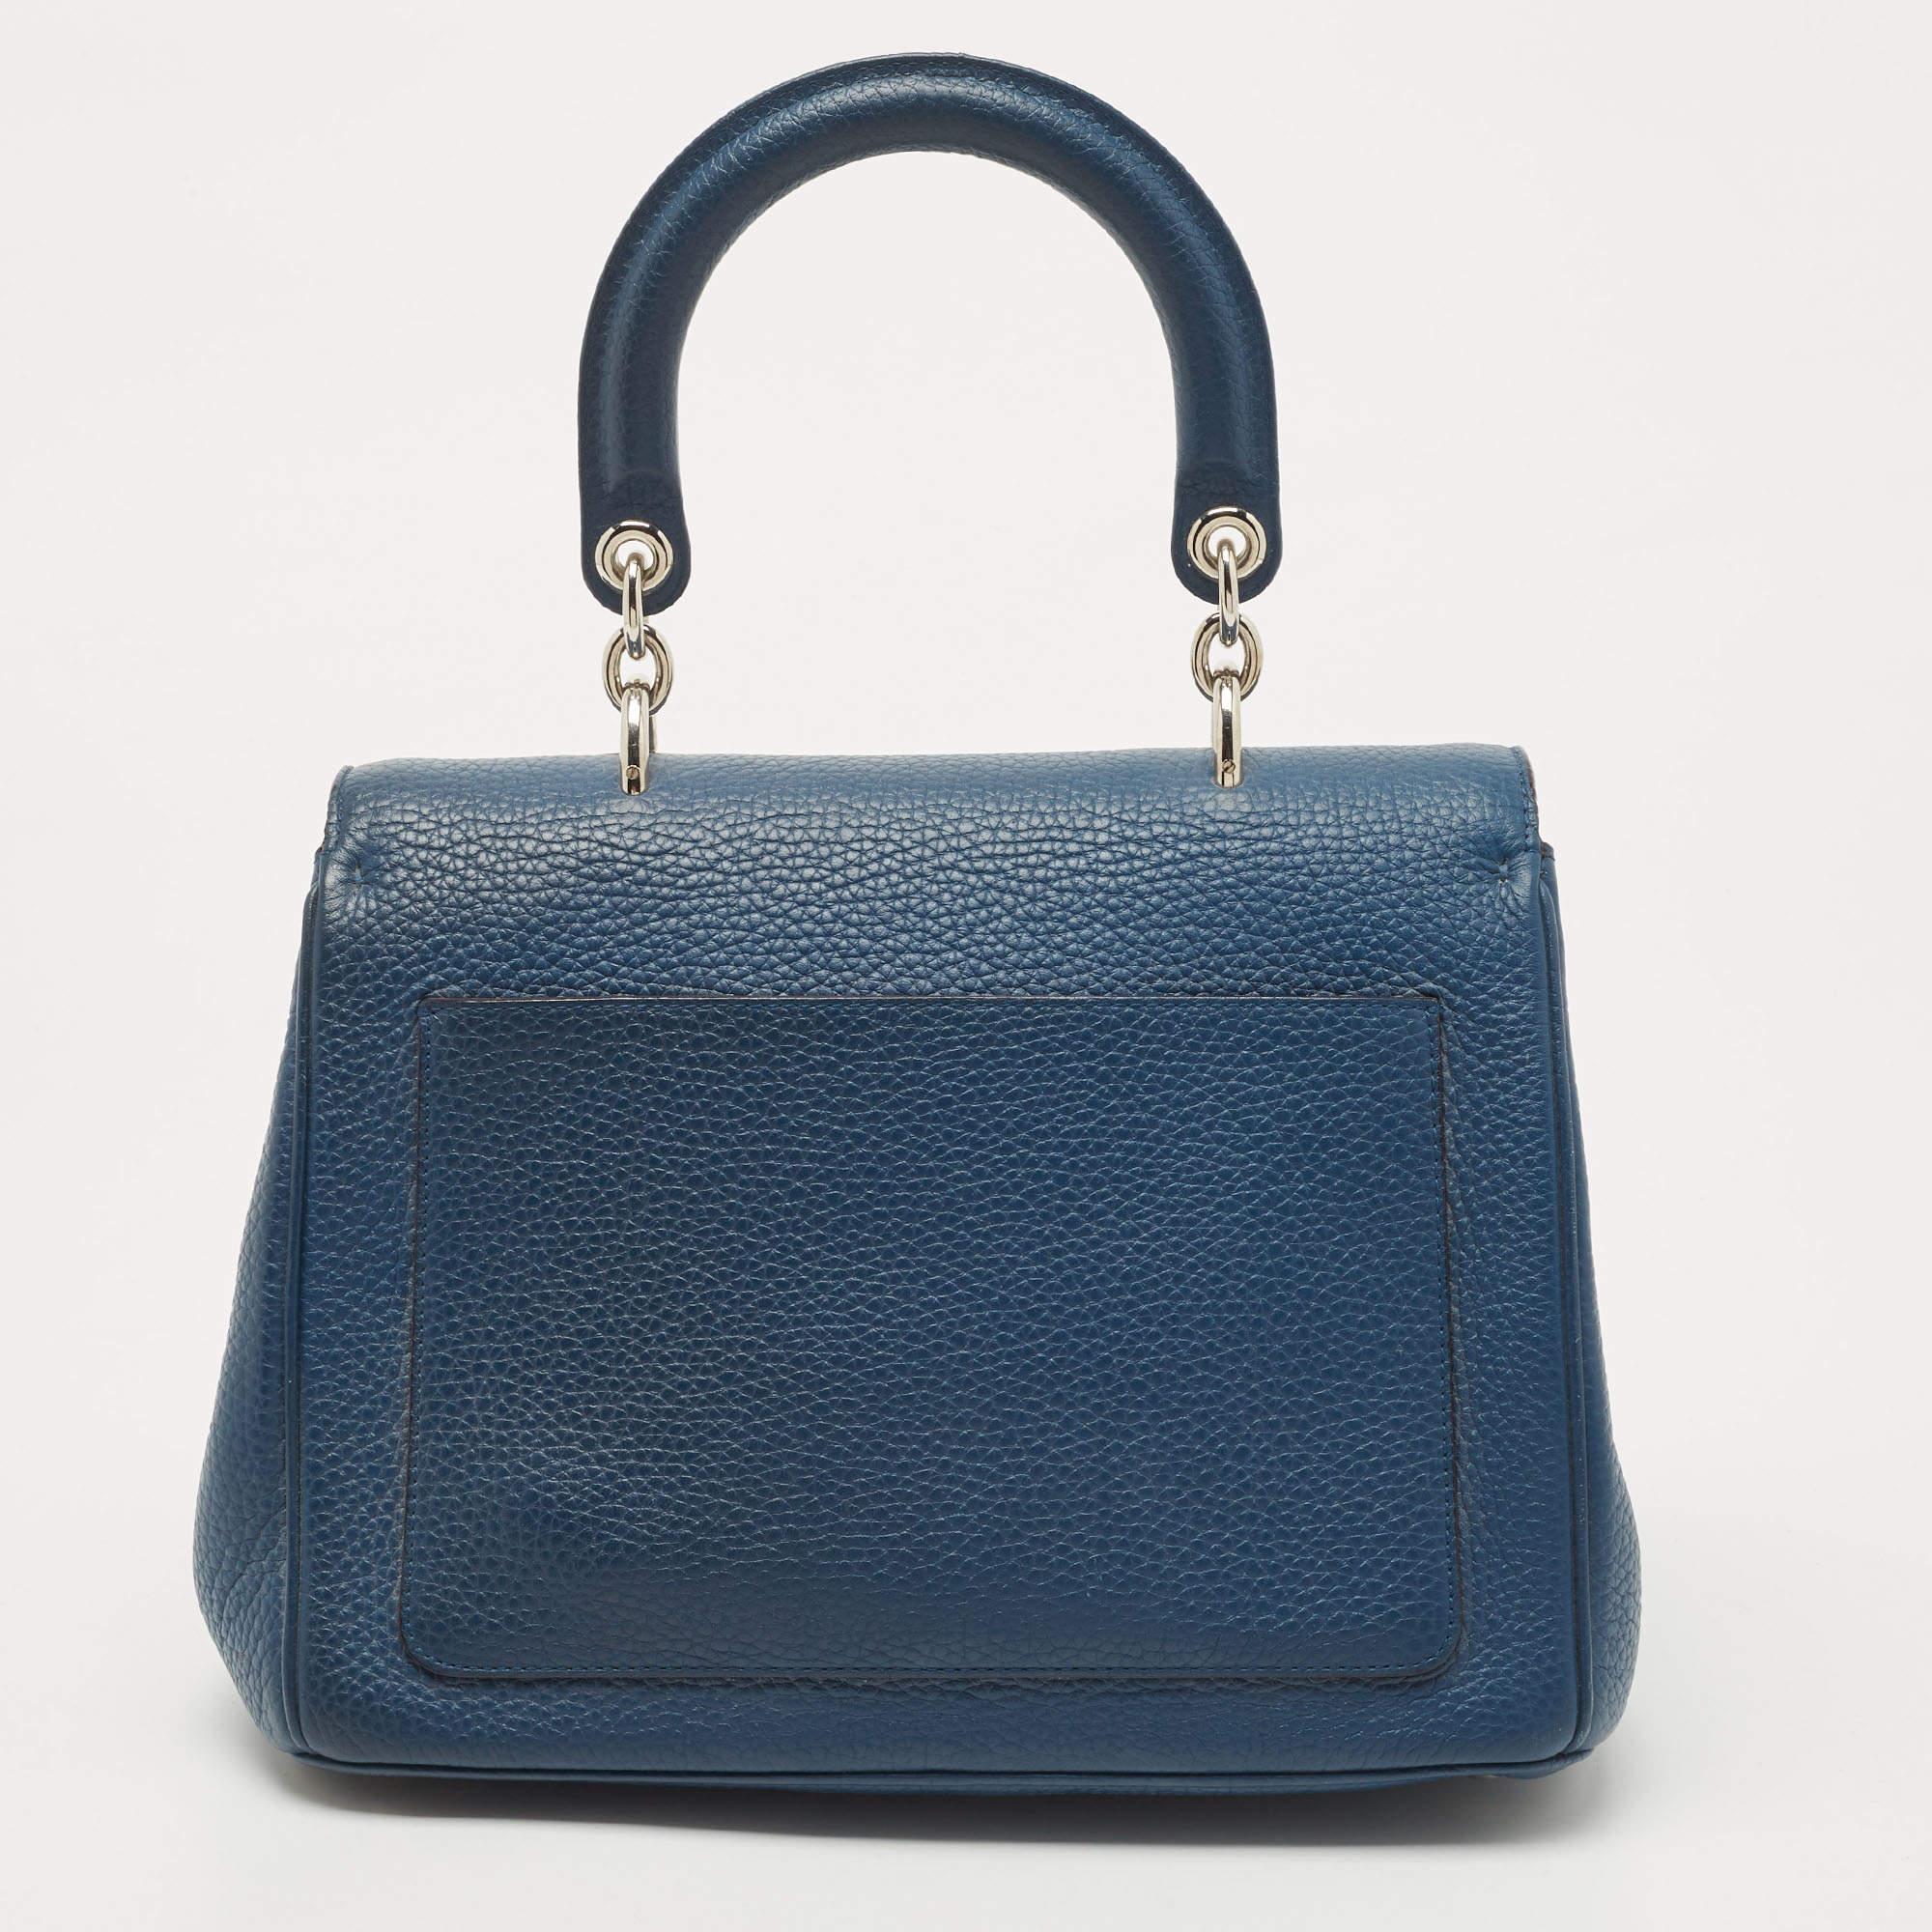 Pretty in dark blue, this Dior bag is crafted from leather and designed with a front flap and dual handling options. The leather-lined interior houses an open compartment that can easily accommodate your daily essentials, and the bag is complete